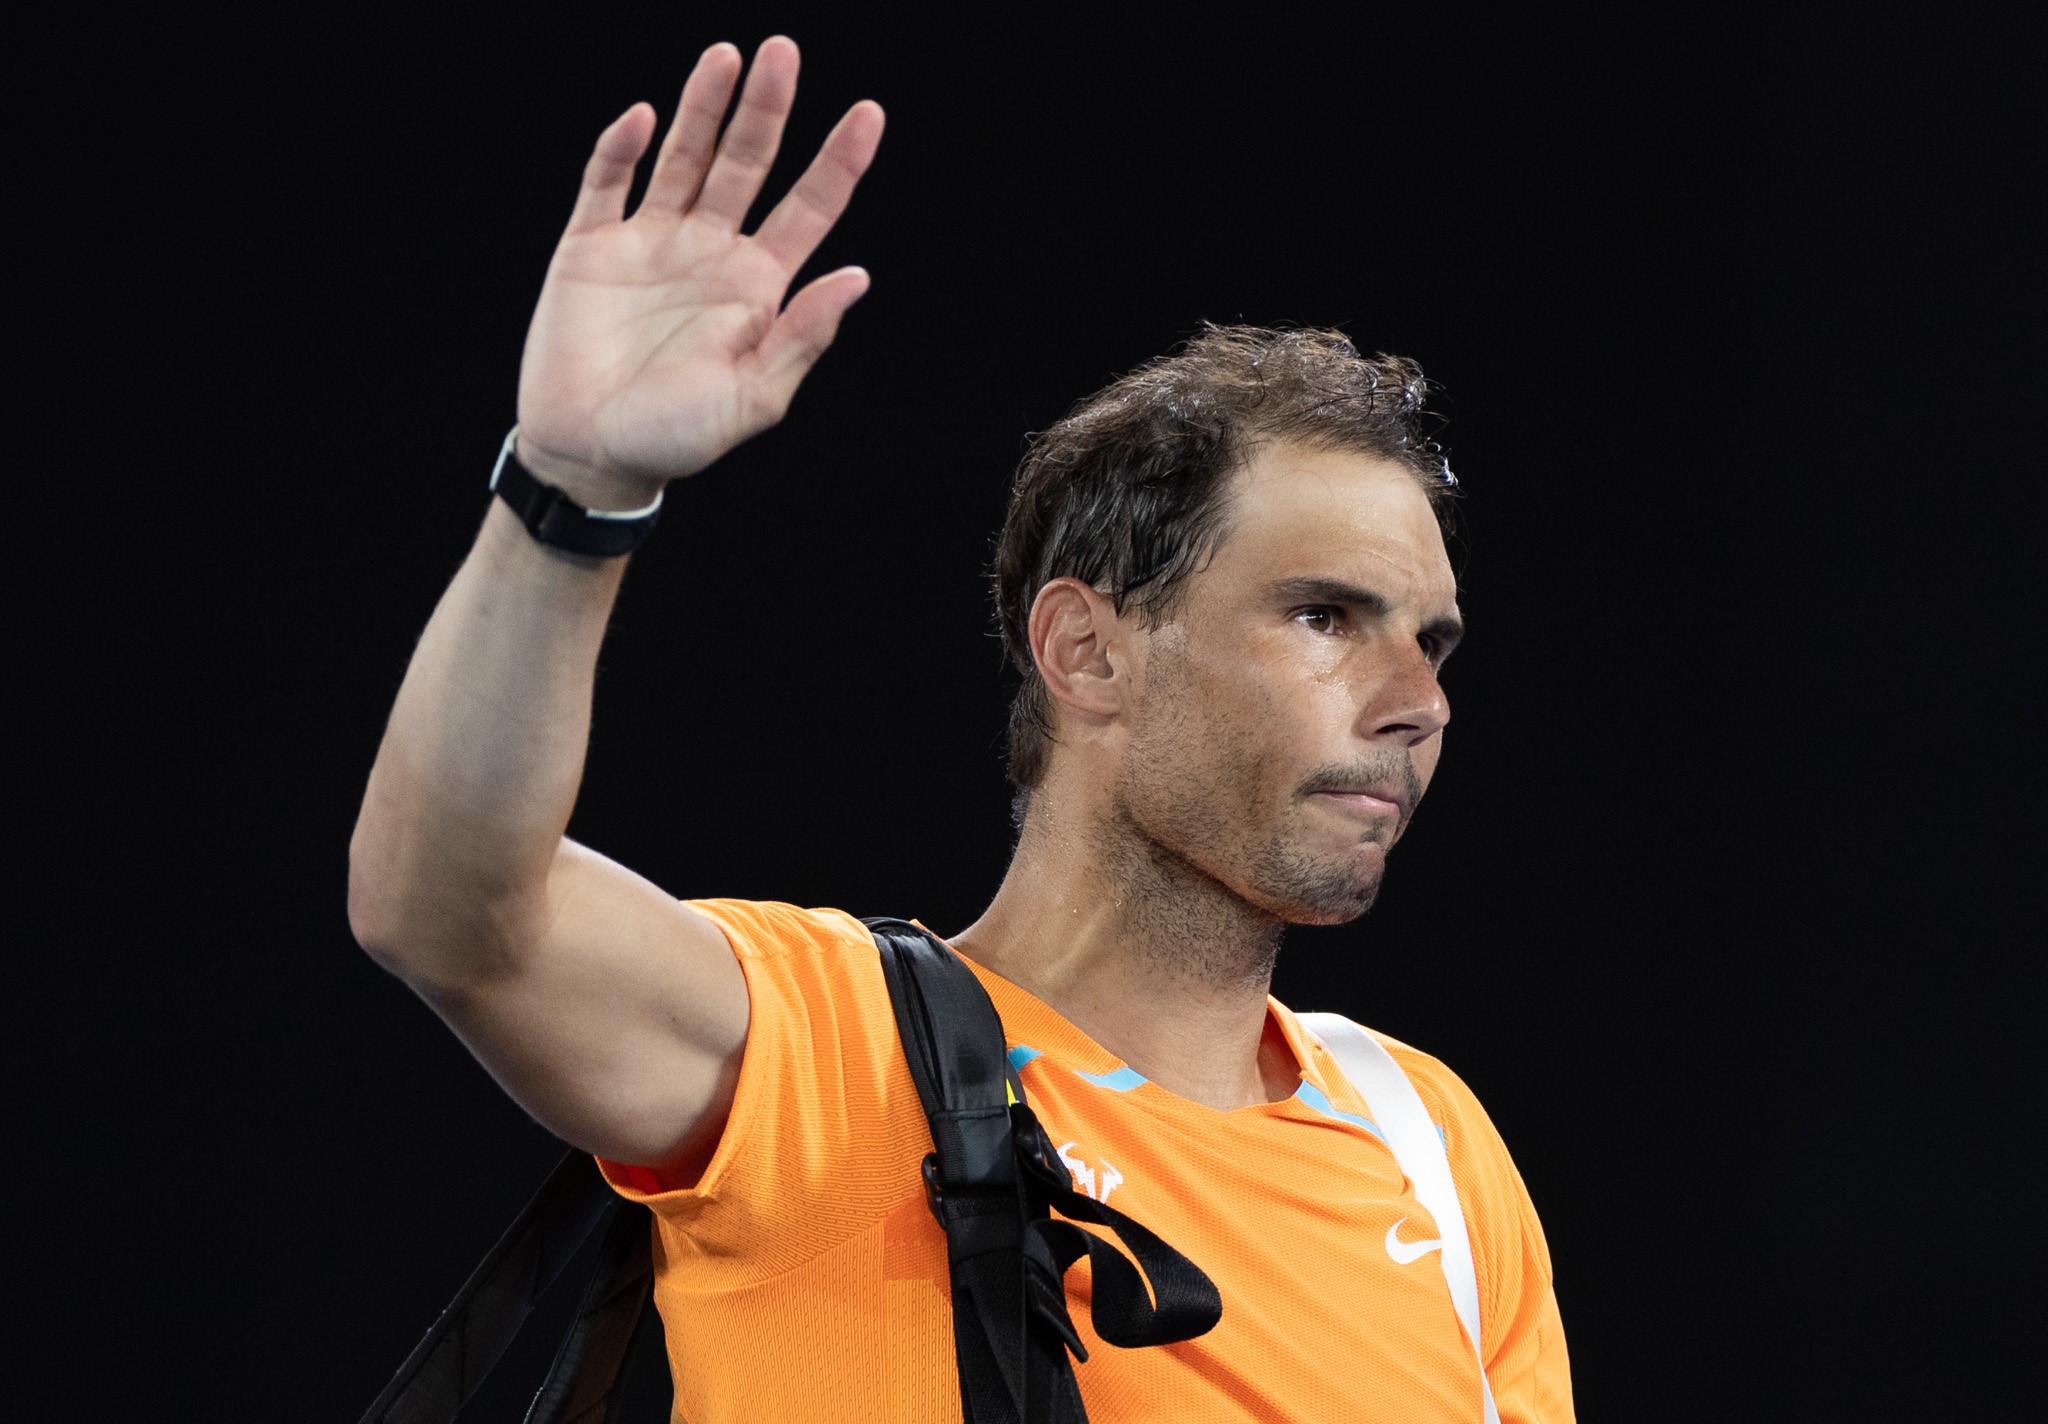 Rafael Nadal of Spain waves to spectators after the men's singles 2nd round match against Mackenzie McDonald of the United States at Australian Open tennis tournament in Melbourne, Australia, on Jan. 18, 2023. (Photo by Hu Jingchen/Xinhua via Getty Images)